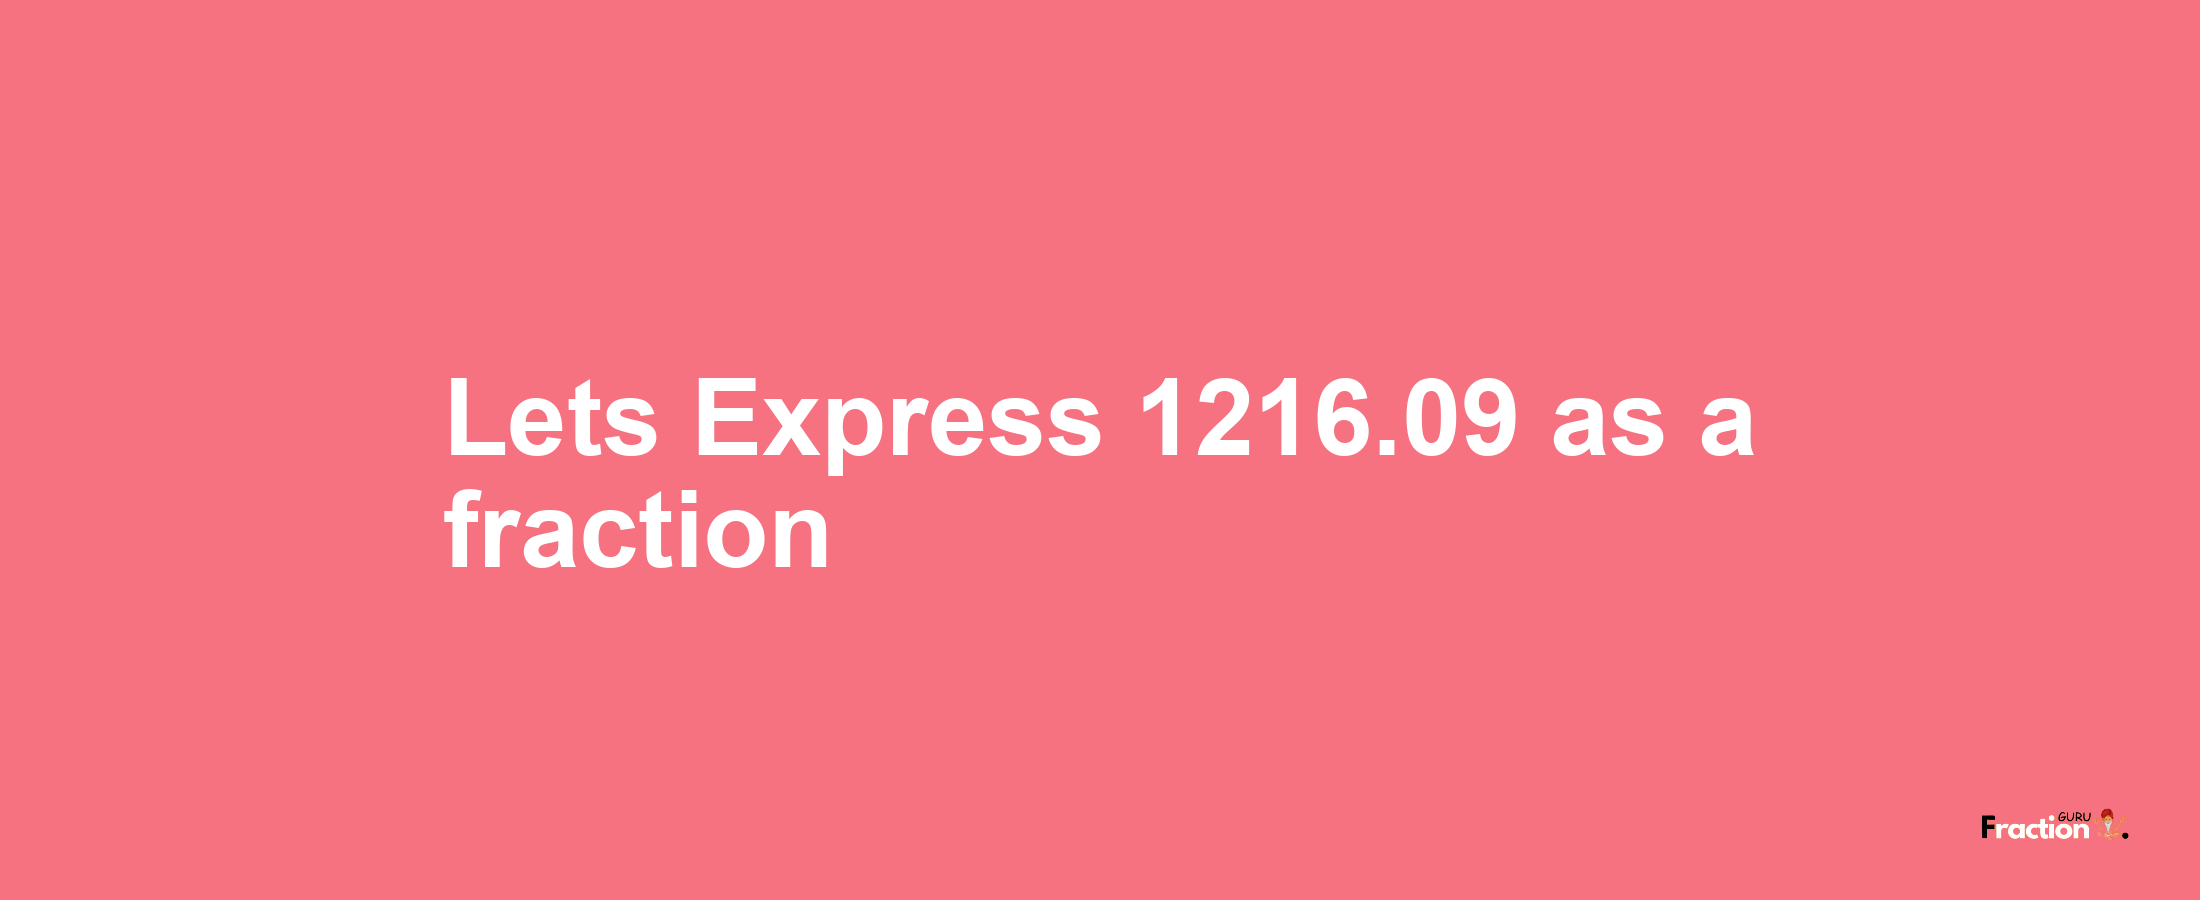 Lets Express 1216.09 as afraction